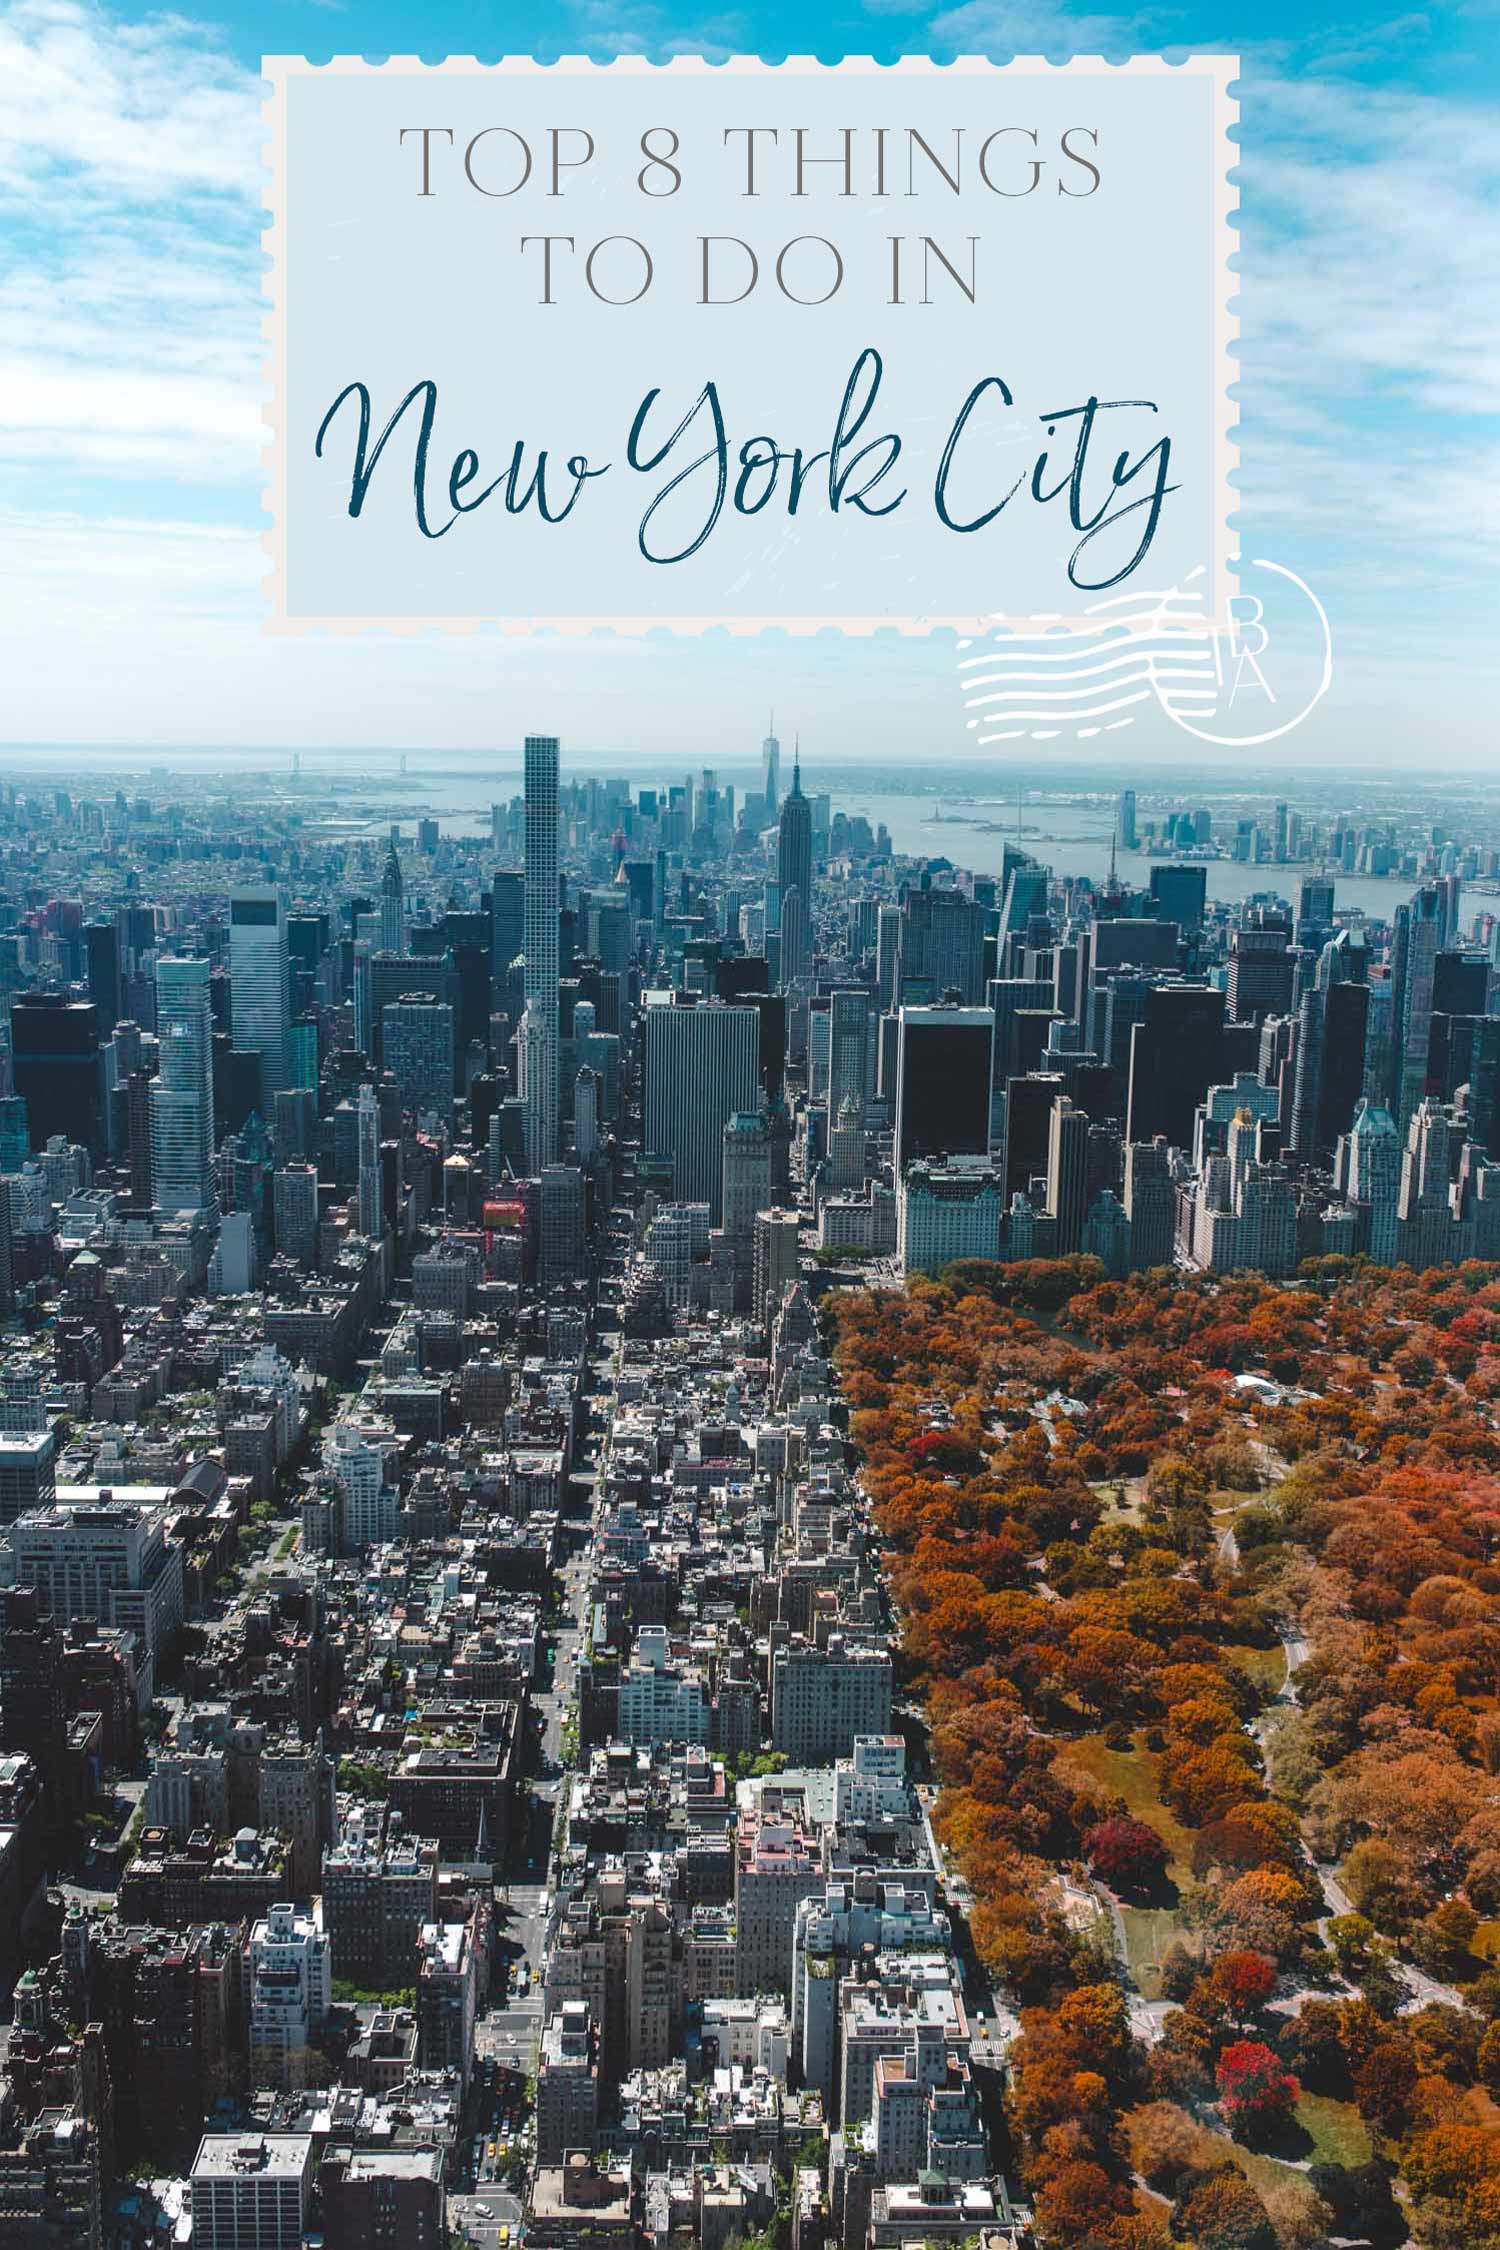 Top 8 Things to Do in New York City